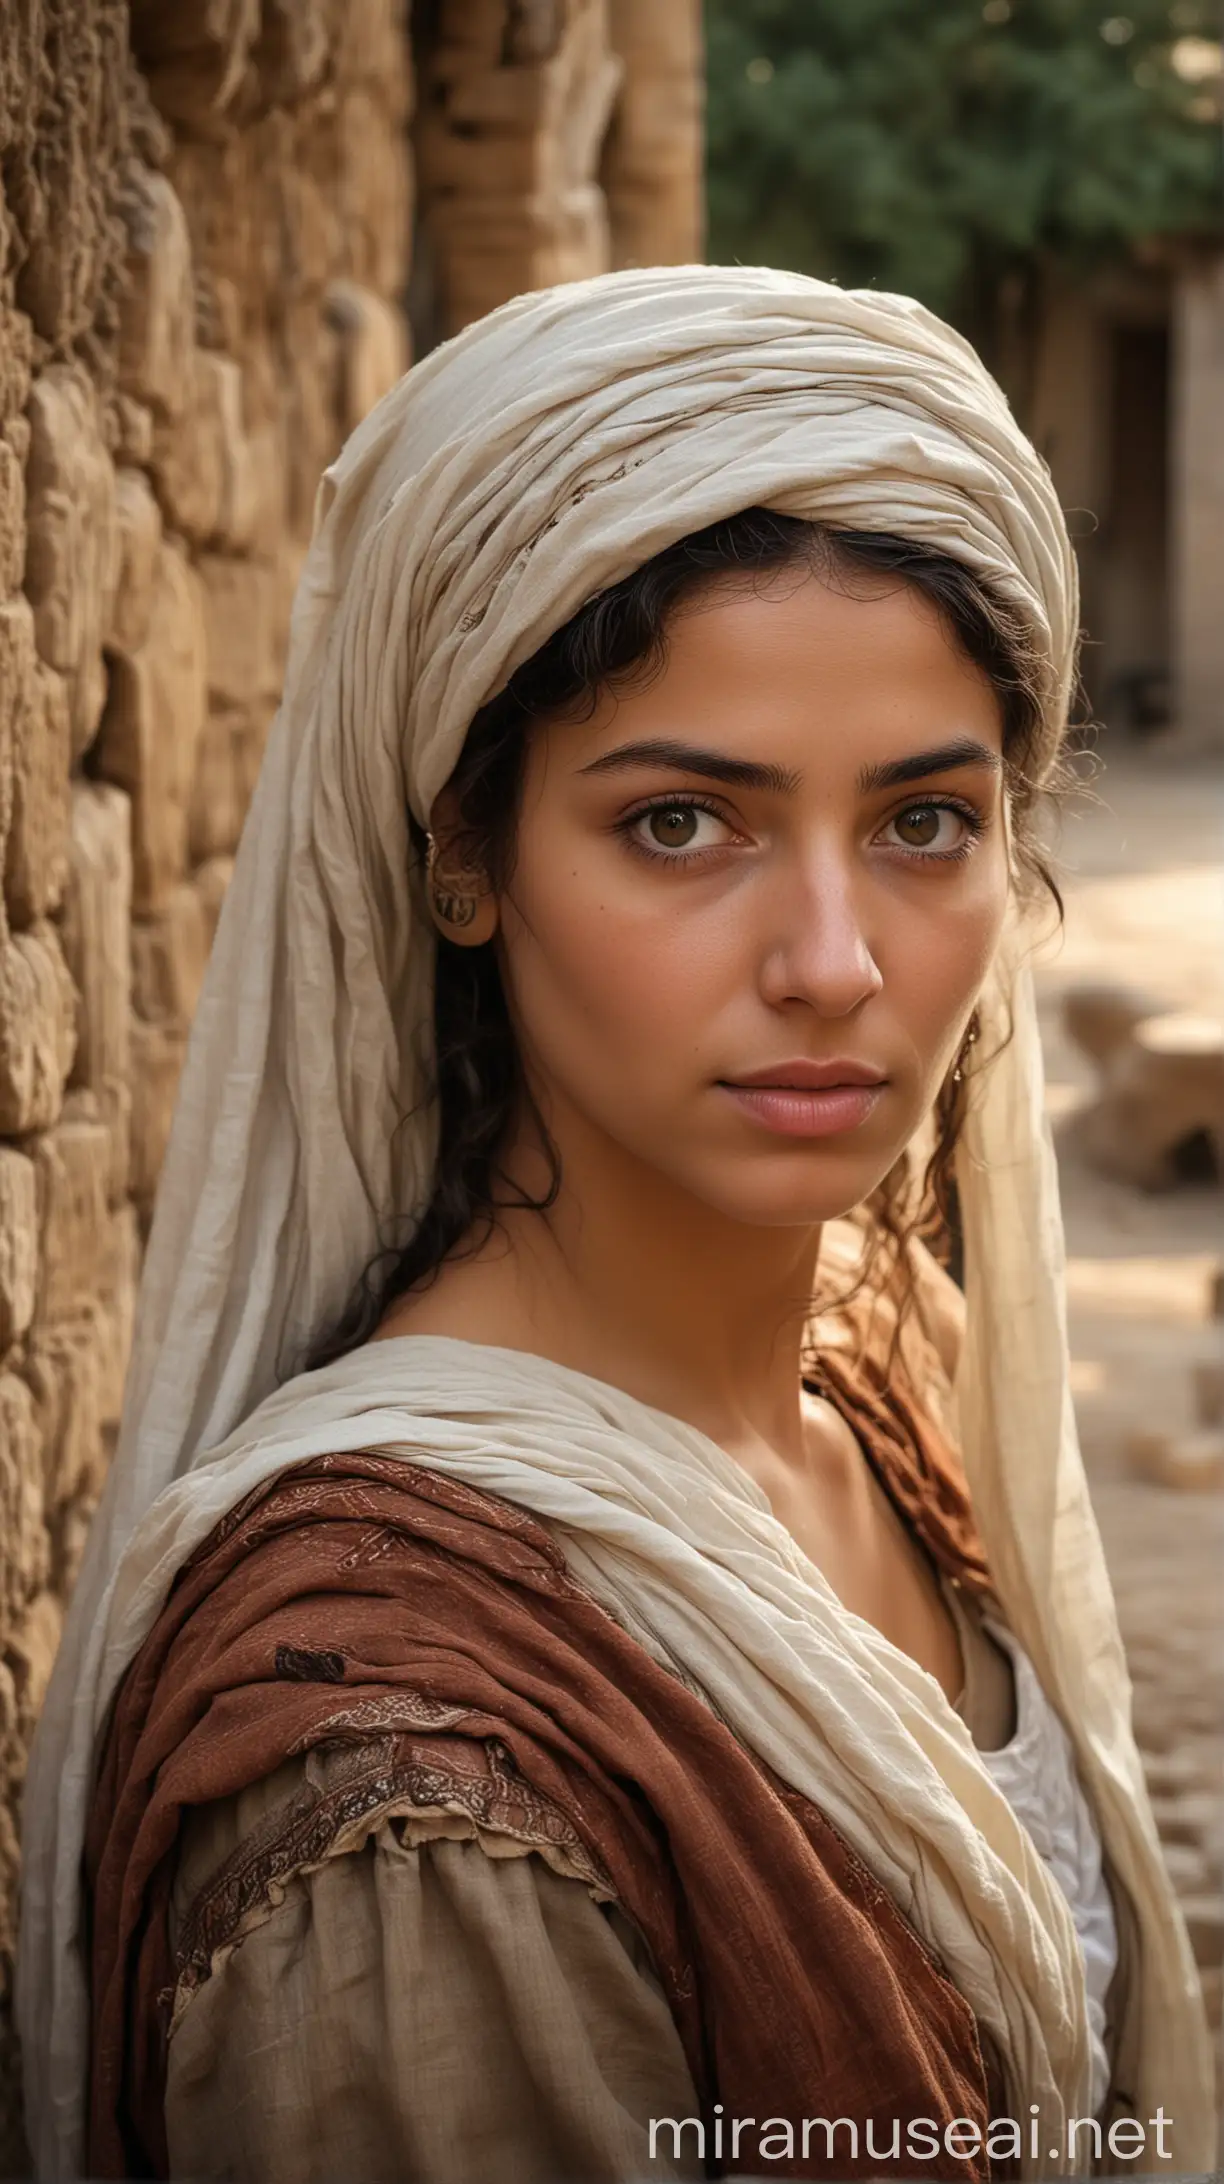 A serene portrait of Bilhah, a woman from 18th century BC, with a calm and timid expression. The scene is set in an ancient Hebrew village, capturing the historical atmosphere."In ancient world 